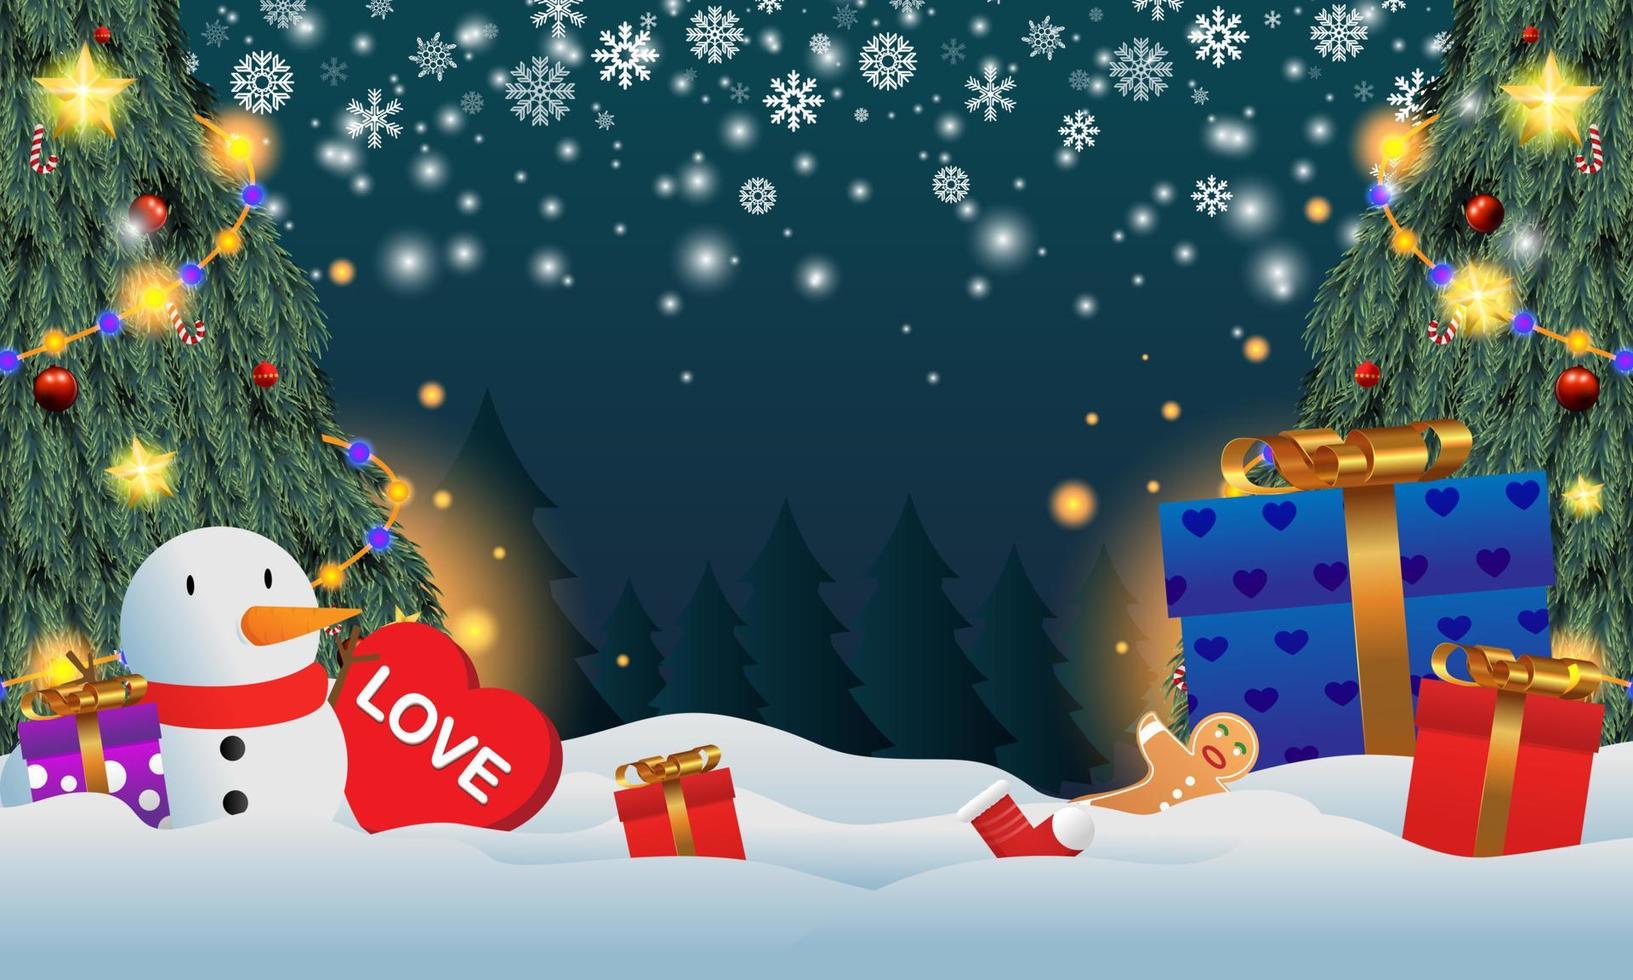 Gifts placed under the Christmas tree. Santa's gift in the snow. Various gifts such as teddy bears, gift boxes and candies. vector